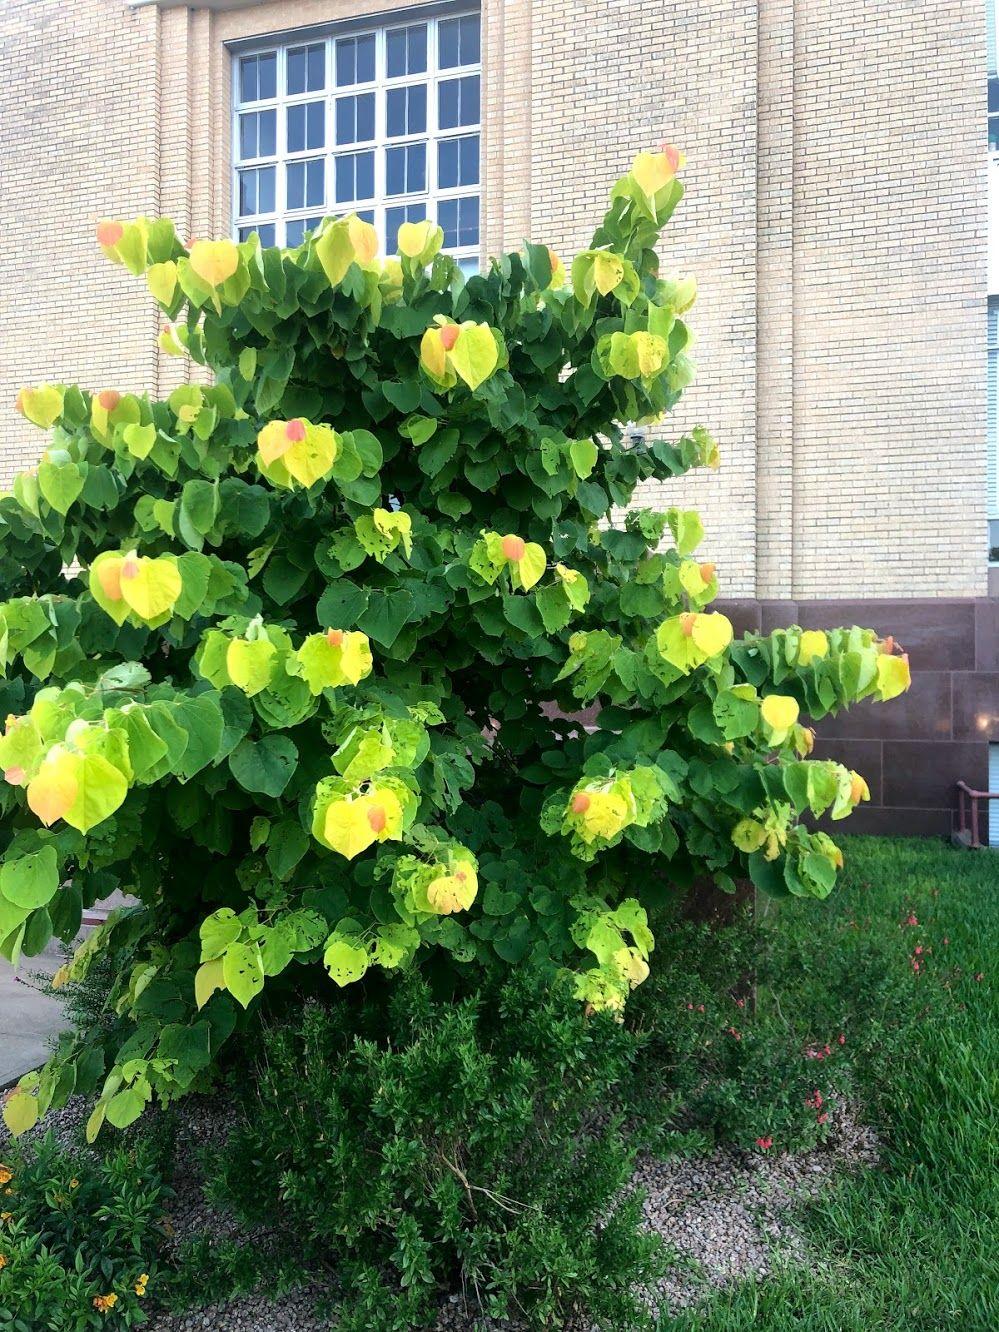 A yellow and green plant in downtown Fredericksburg.